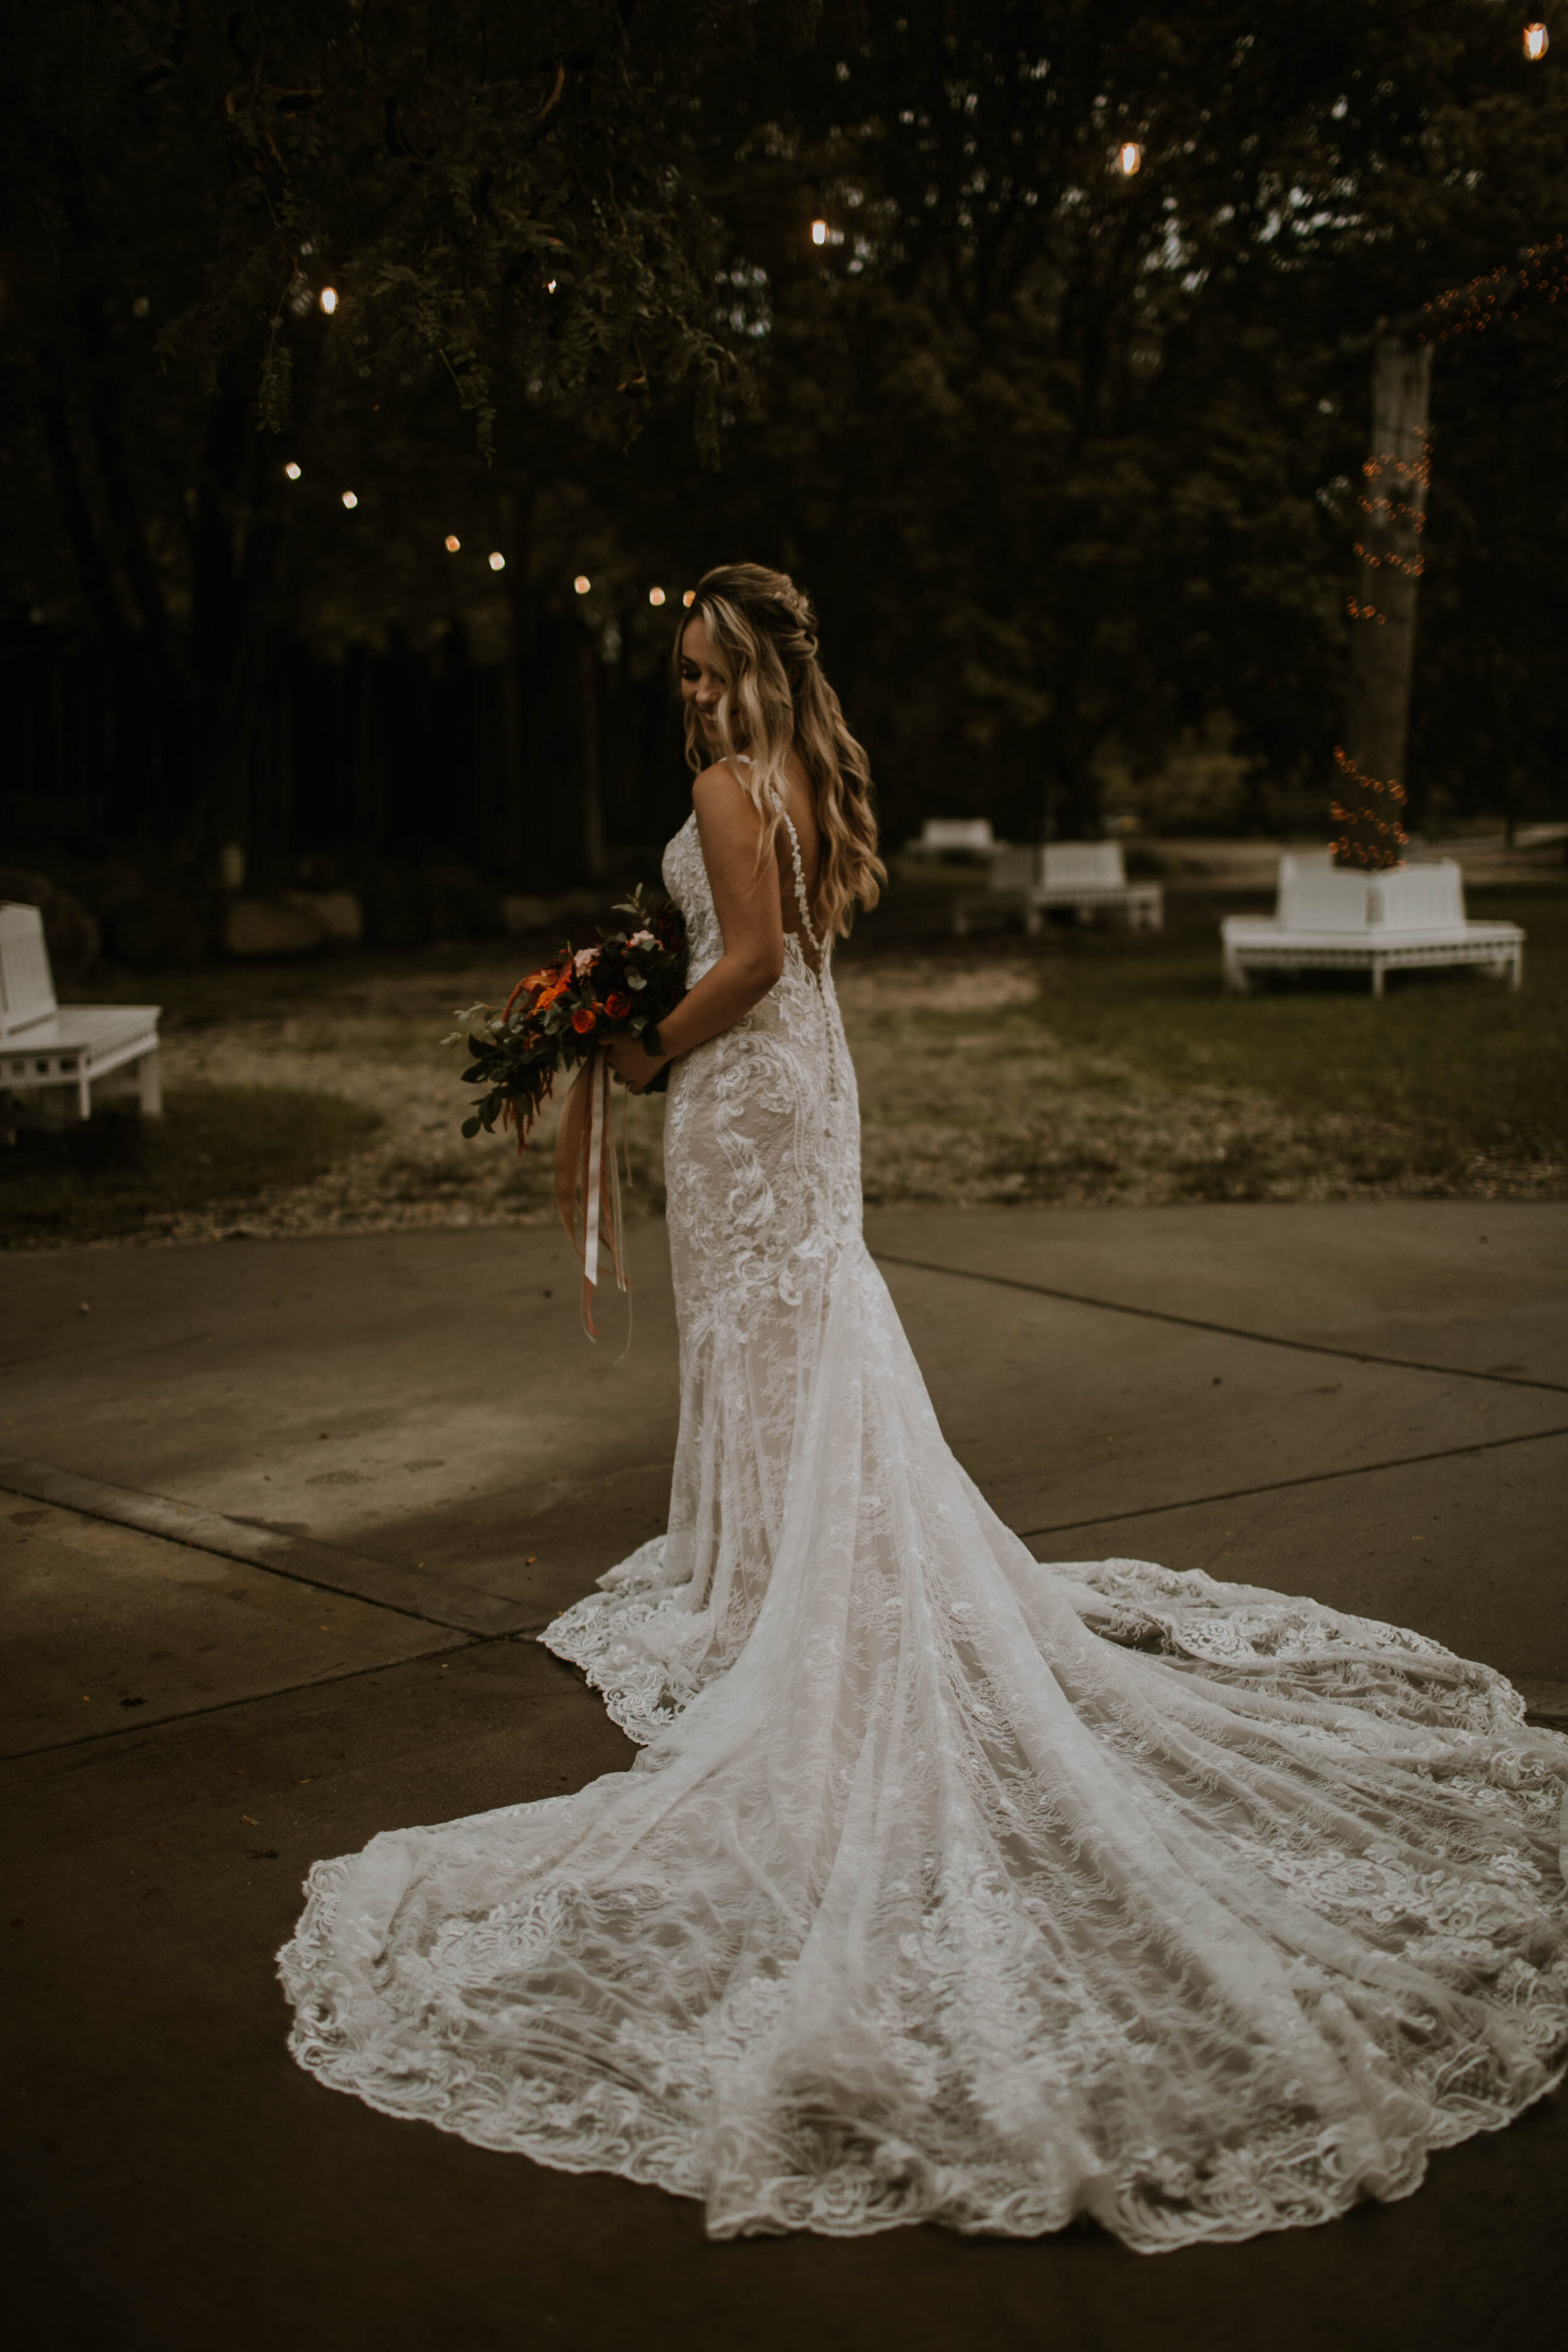 Lace wedding dress: Moody Fall Wedding Styled Shoot captured by Gabrielle Daylor Photography. See more fall wedding ideas at CHItheeWED.com!